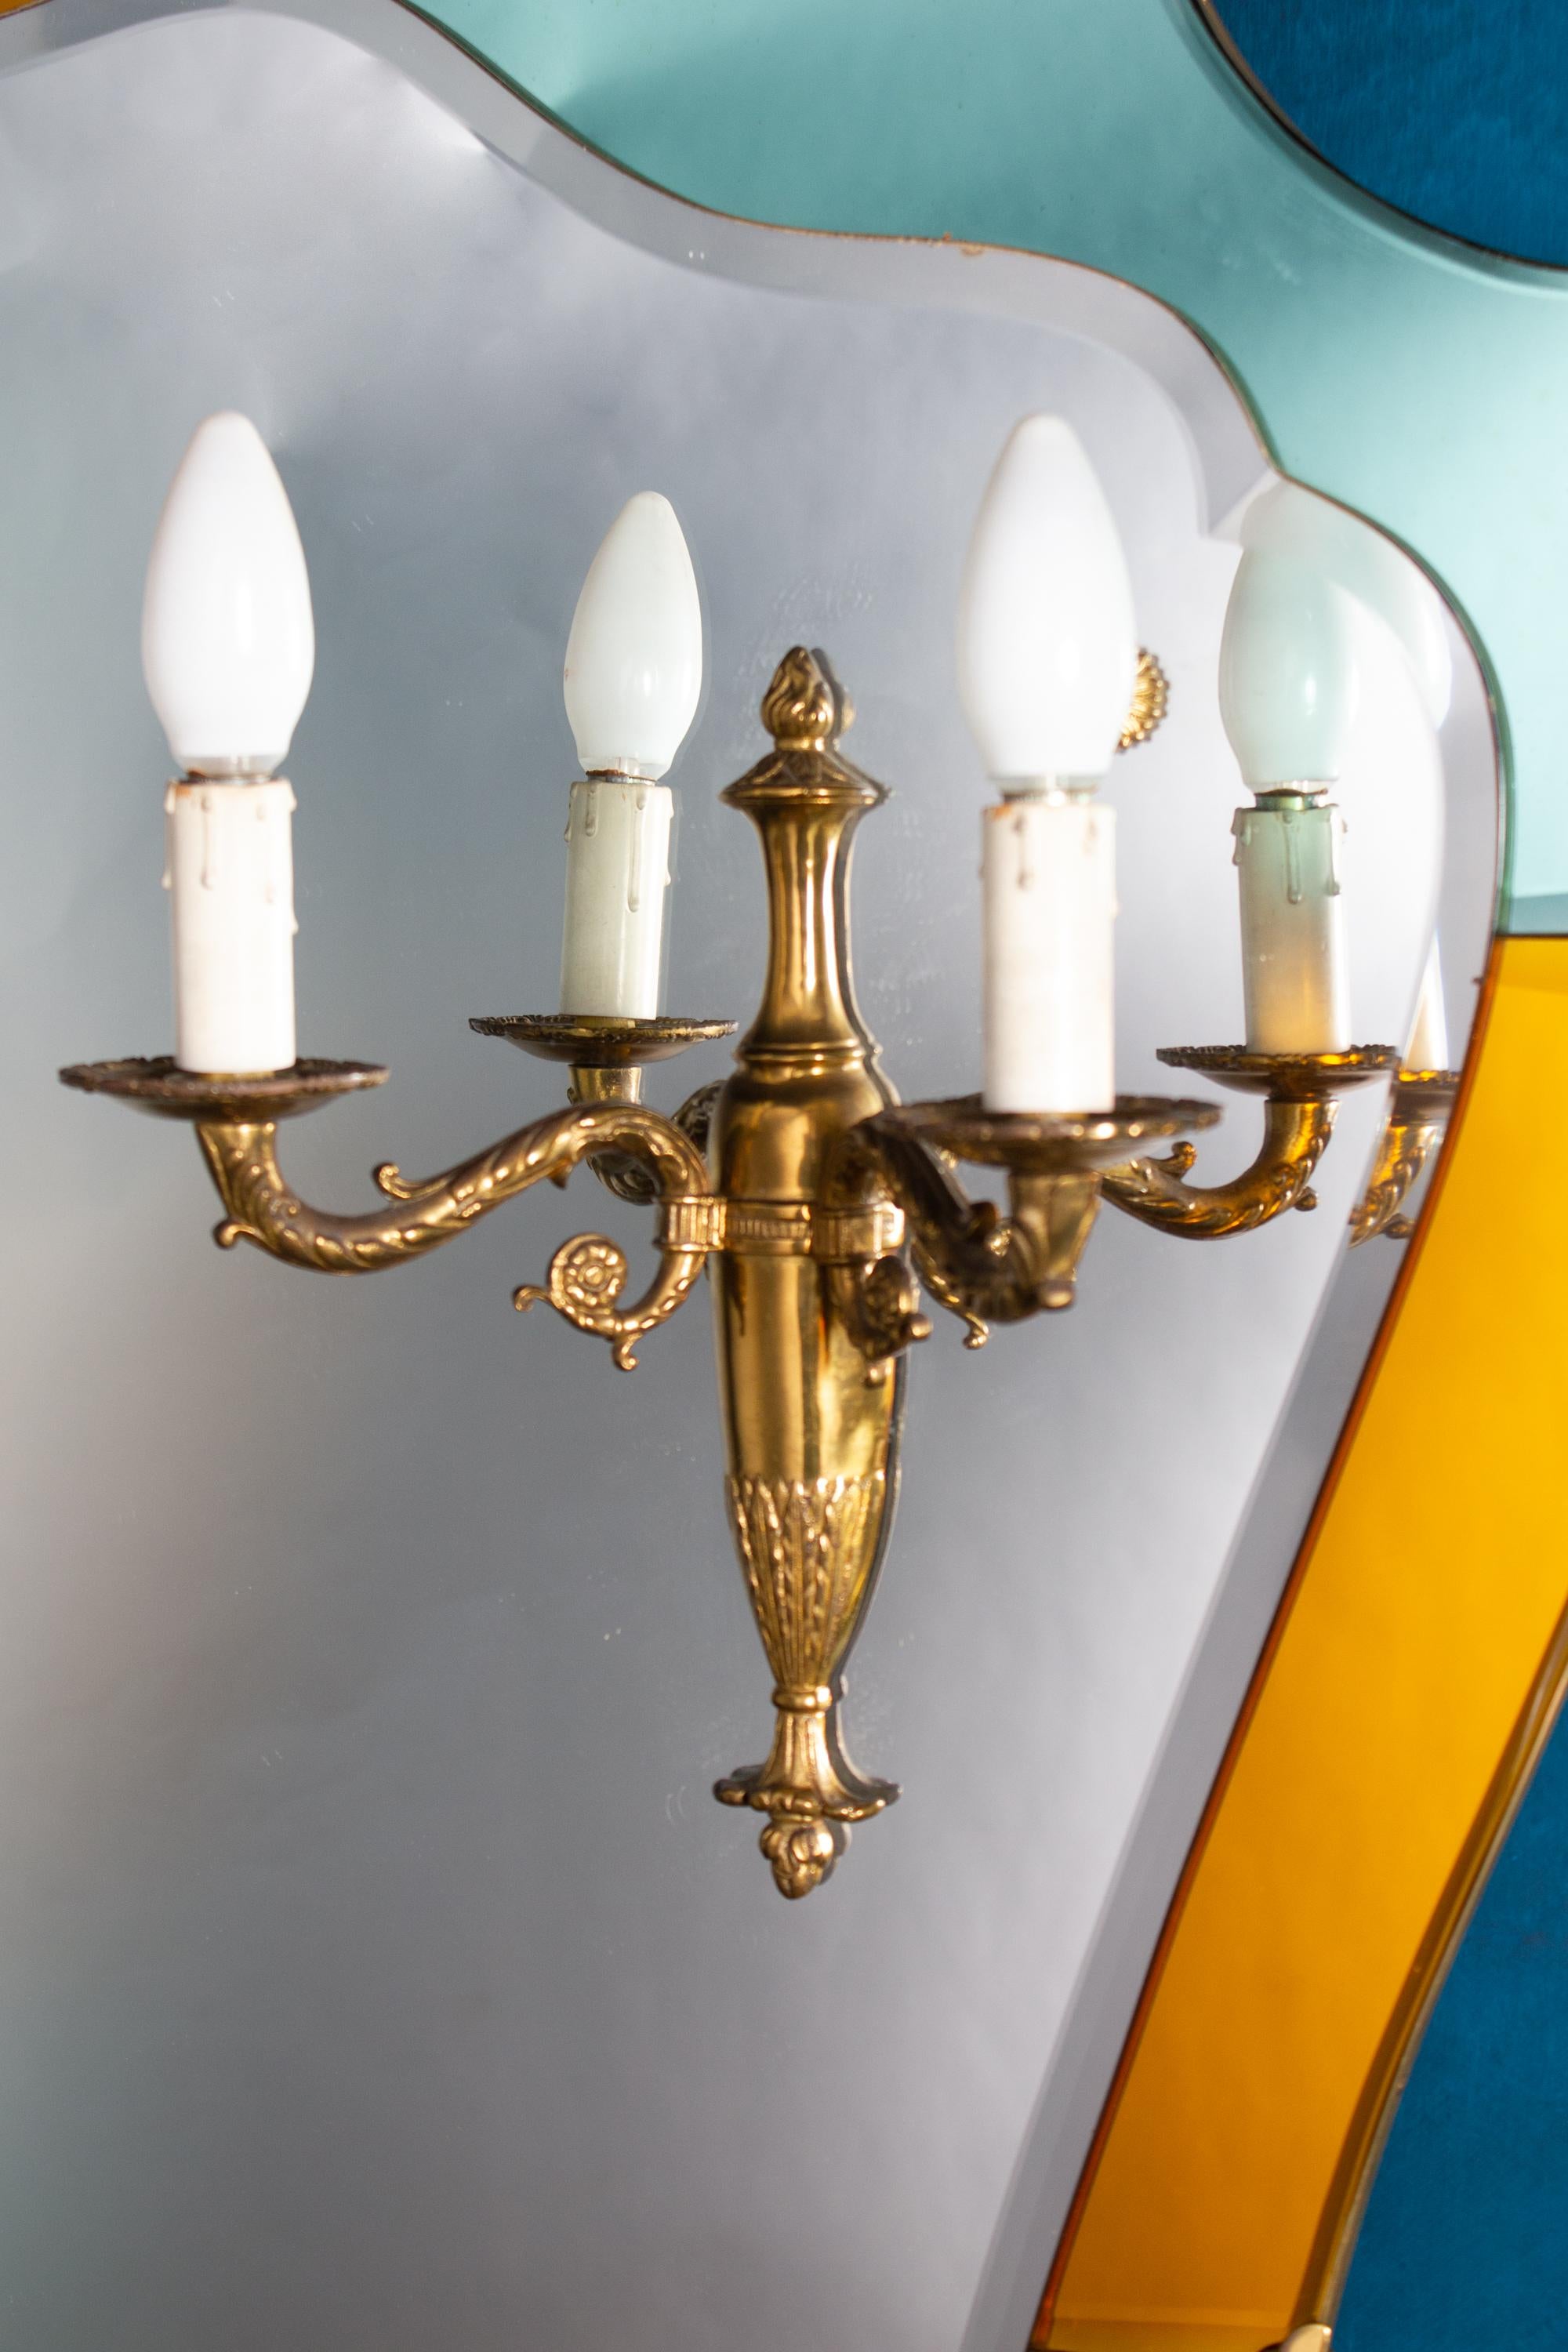 Stunning Midcentury Cristal Art Console Table with Mirror and Sconces, 1950 In Excellent Condition For Sale In Rome, IT